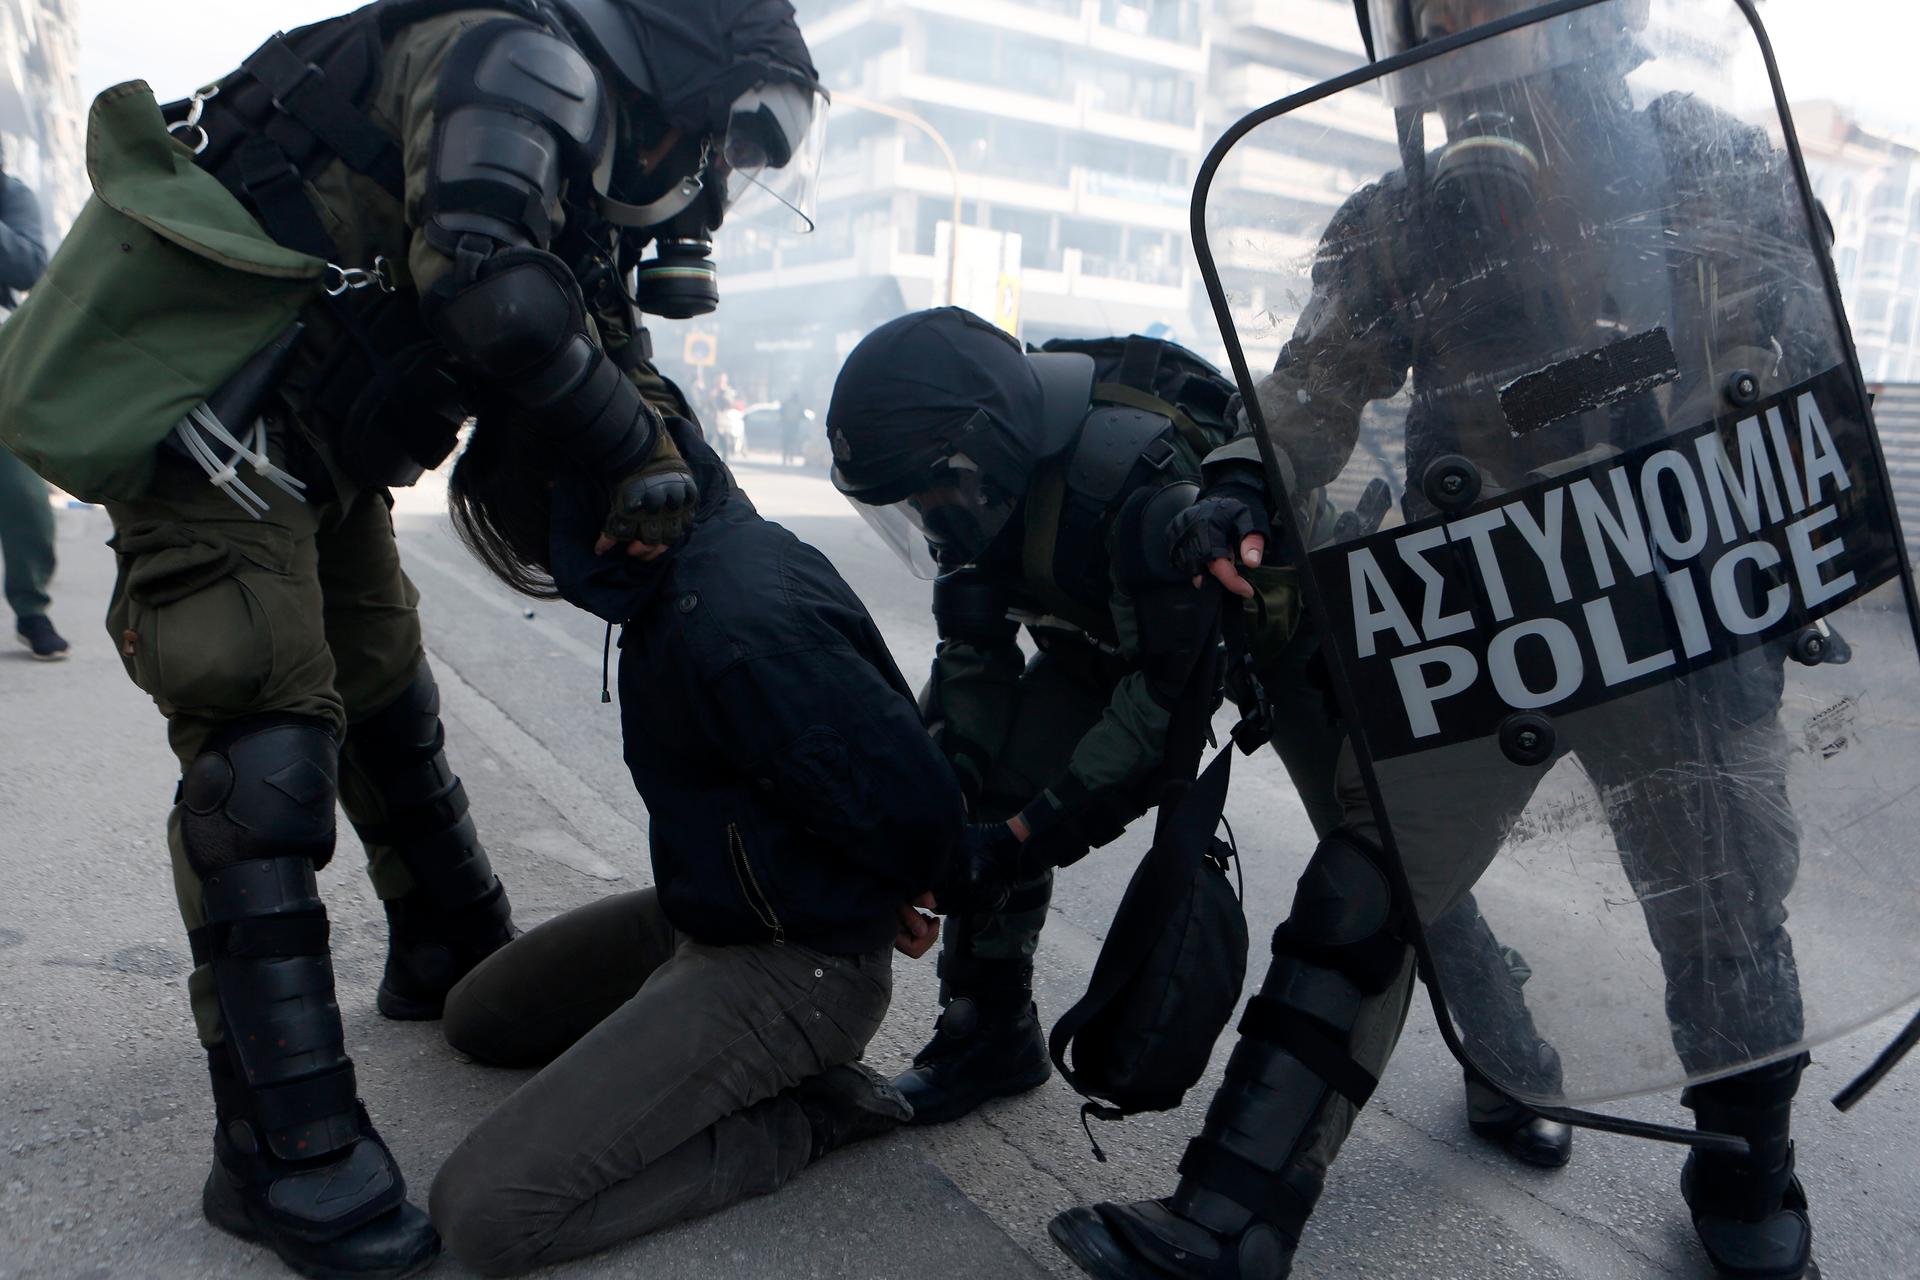 Riot police detain a man during clashes in the northern city of Thessaloniki, Greece, March 11, 2021.